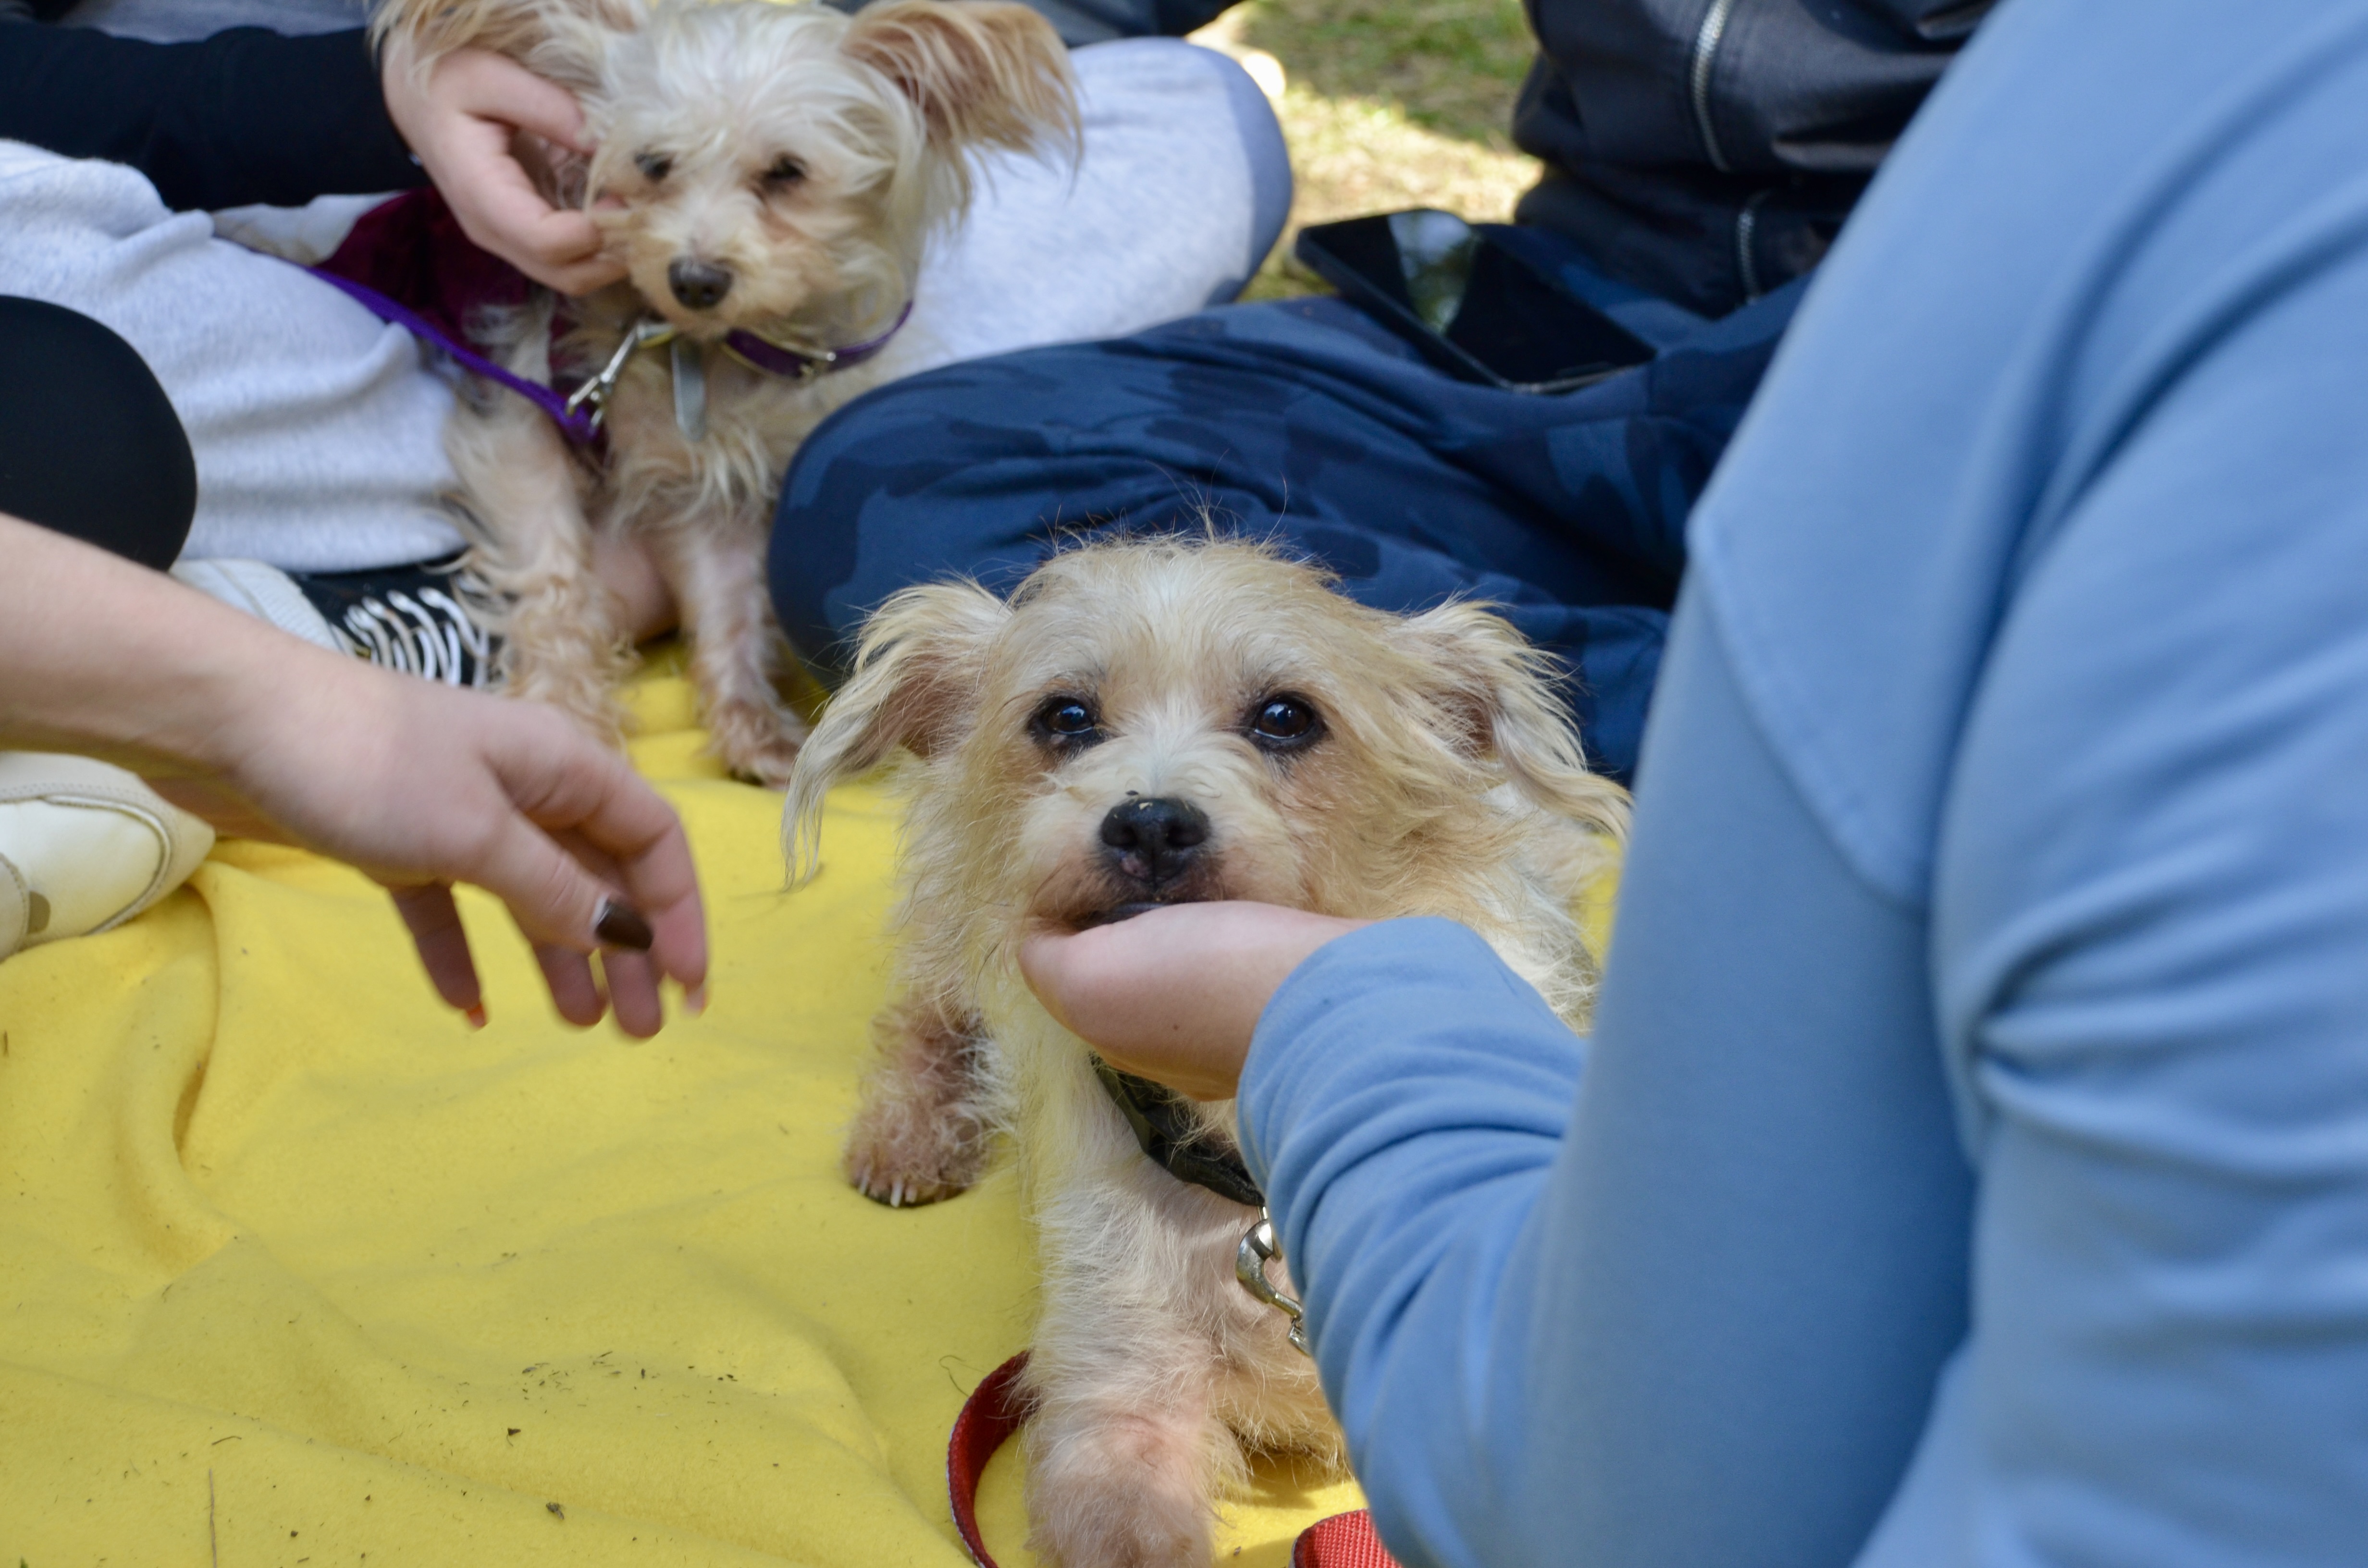 Puppies being held by students at pet therapy event